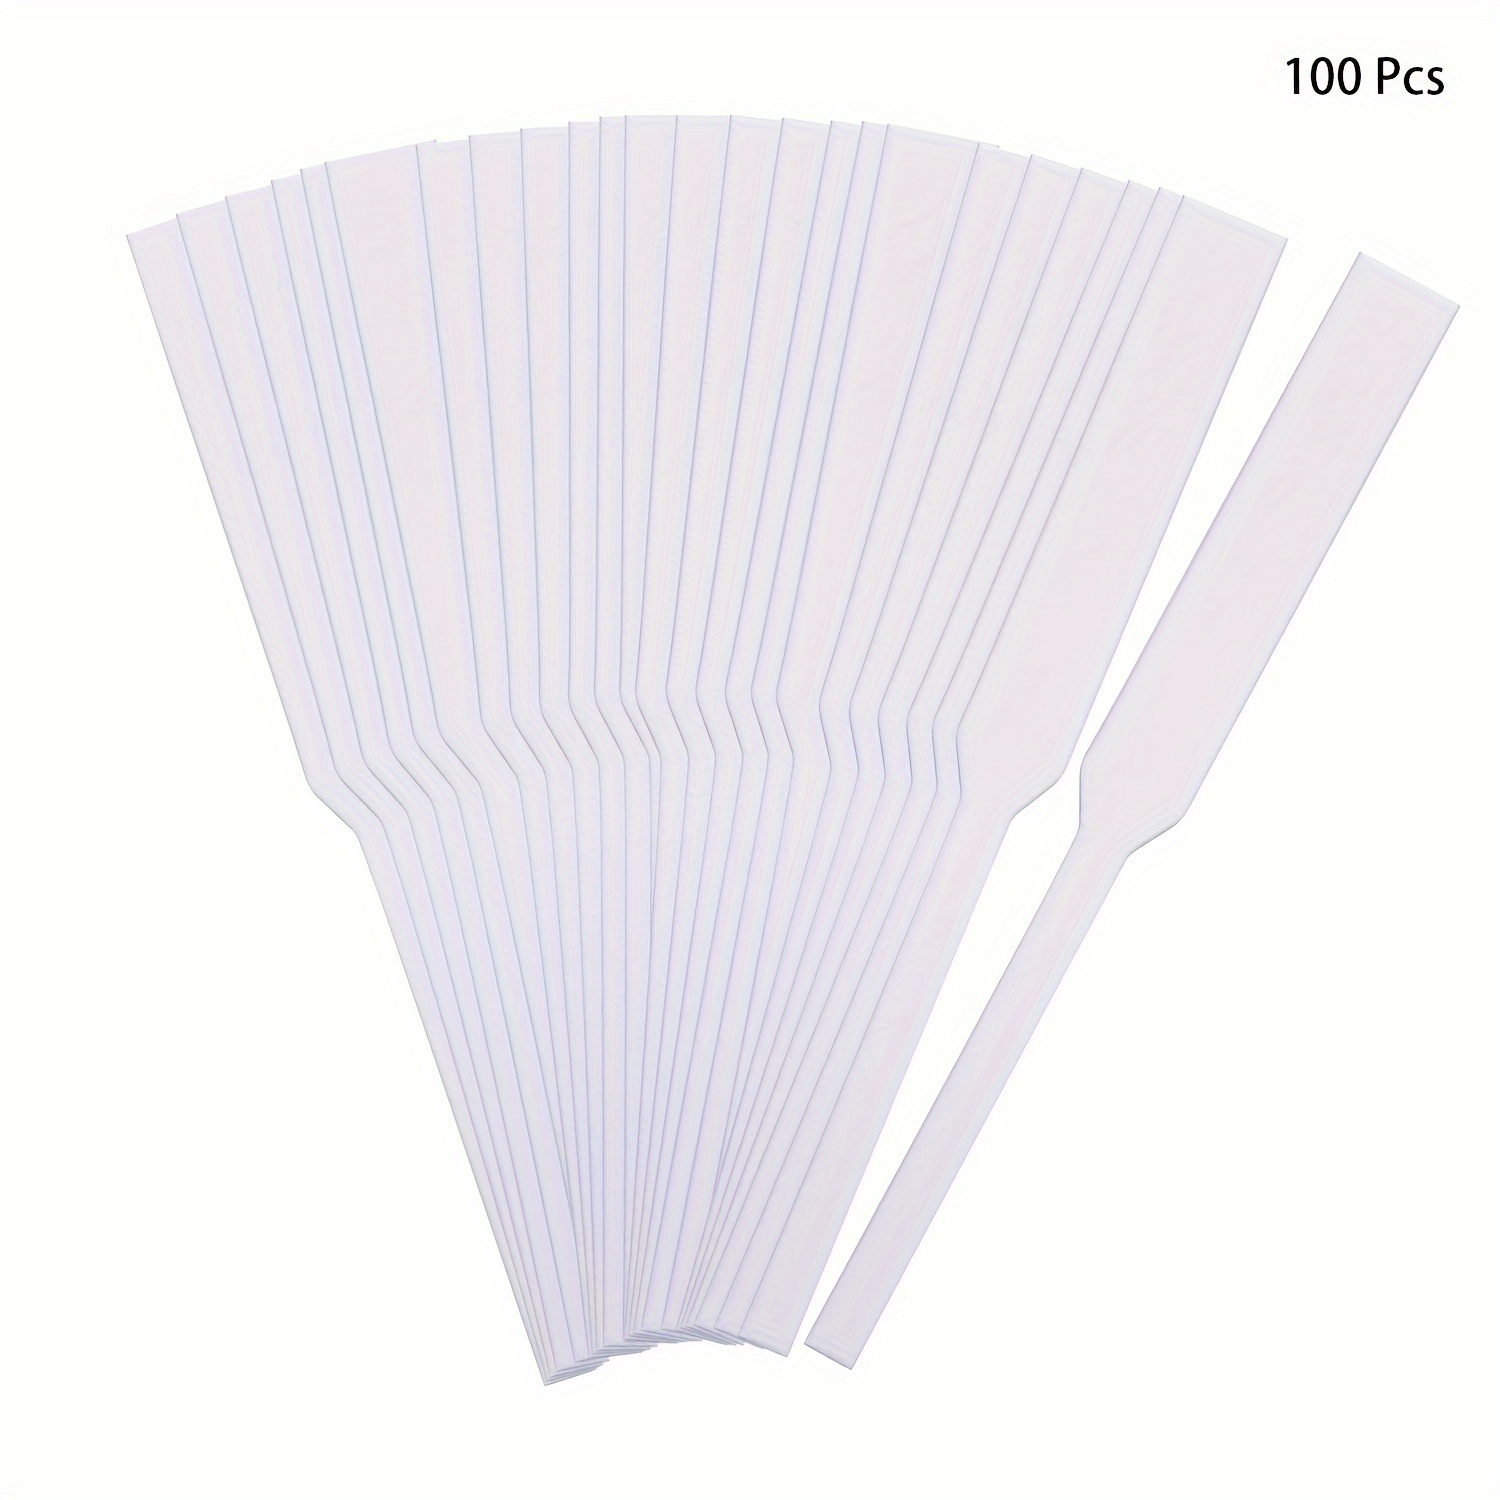  GLEAVI 110pcs Smell Test Paper Scent Test Strips Essential Oils  for Diffusers Essential Oil Test Strips Parfum Oil for Diffuser Essential  Oils Fragrance Paper Strips Blank Pp White Sample : Health